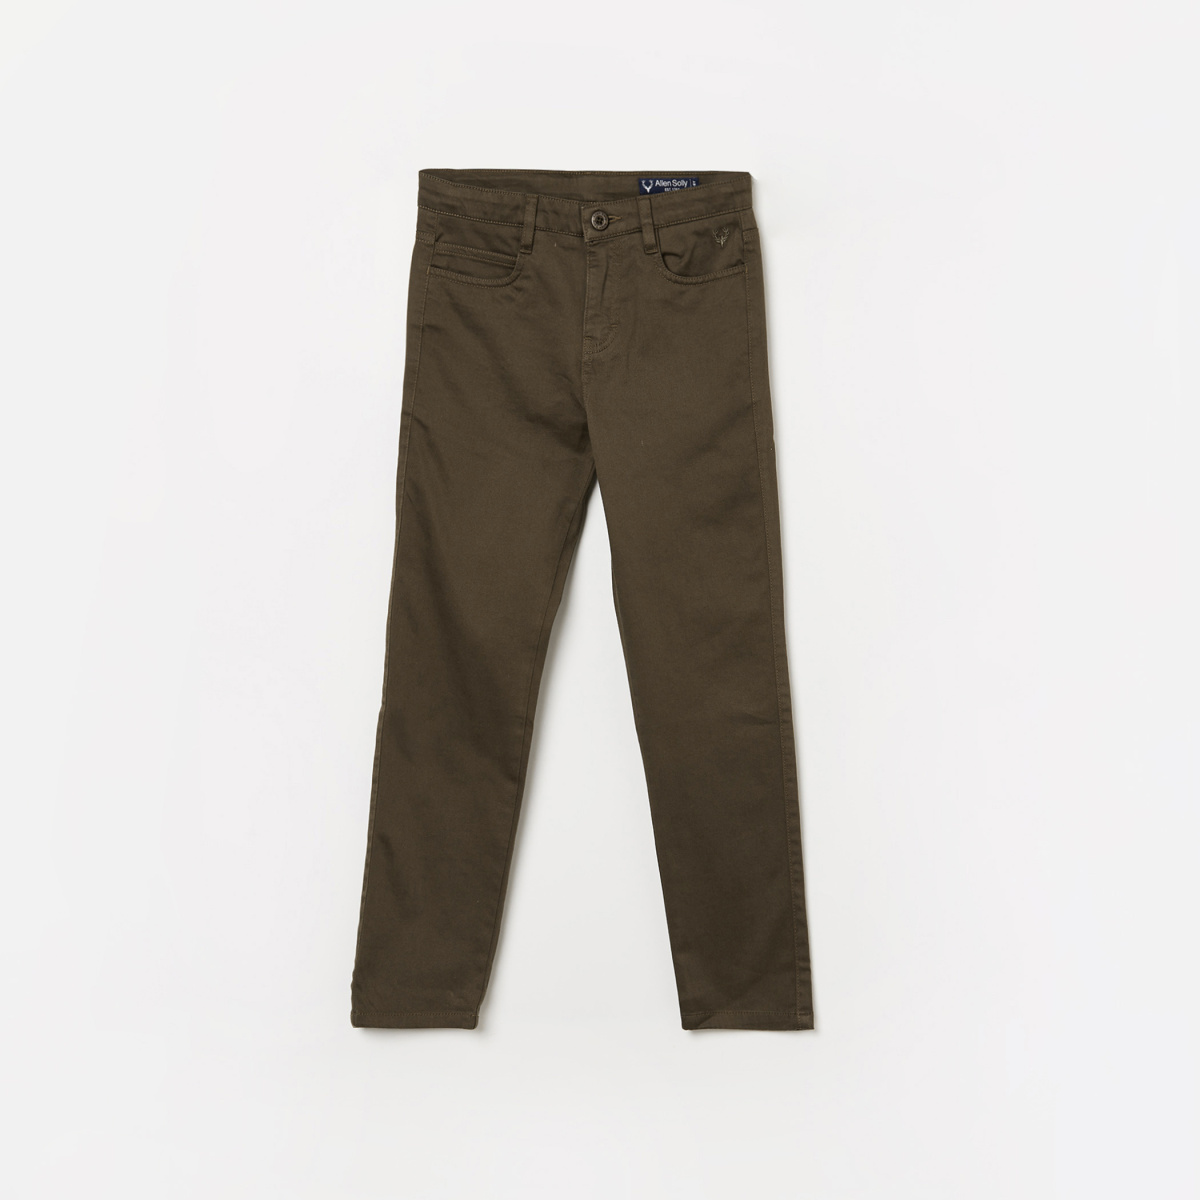 ALLEN SOLLY Boys Solid Trousers